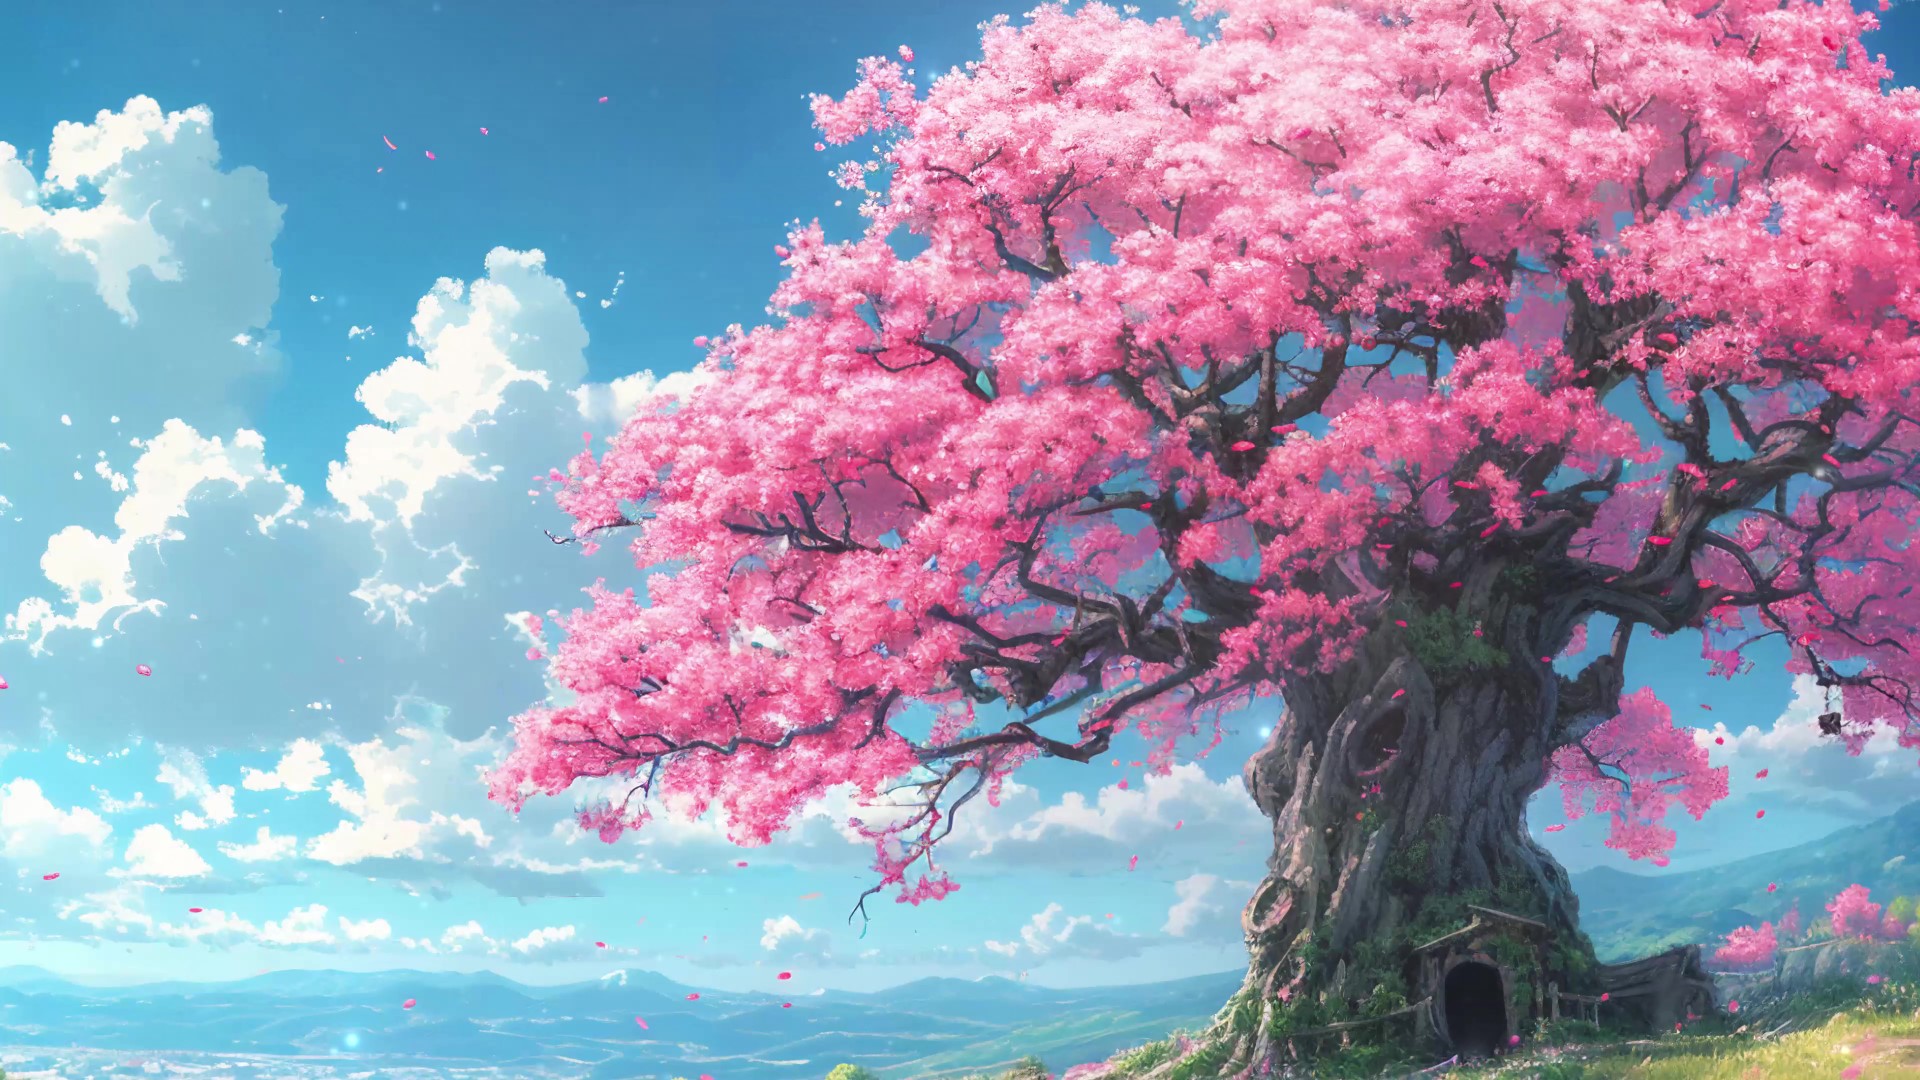 Red cherryblossom tree on a bloodmoon anime style off the side of a  mountain on Craiyon